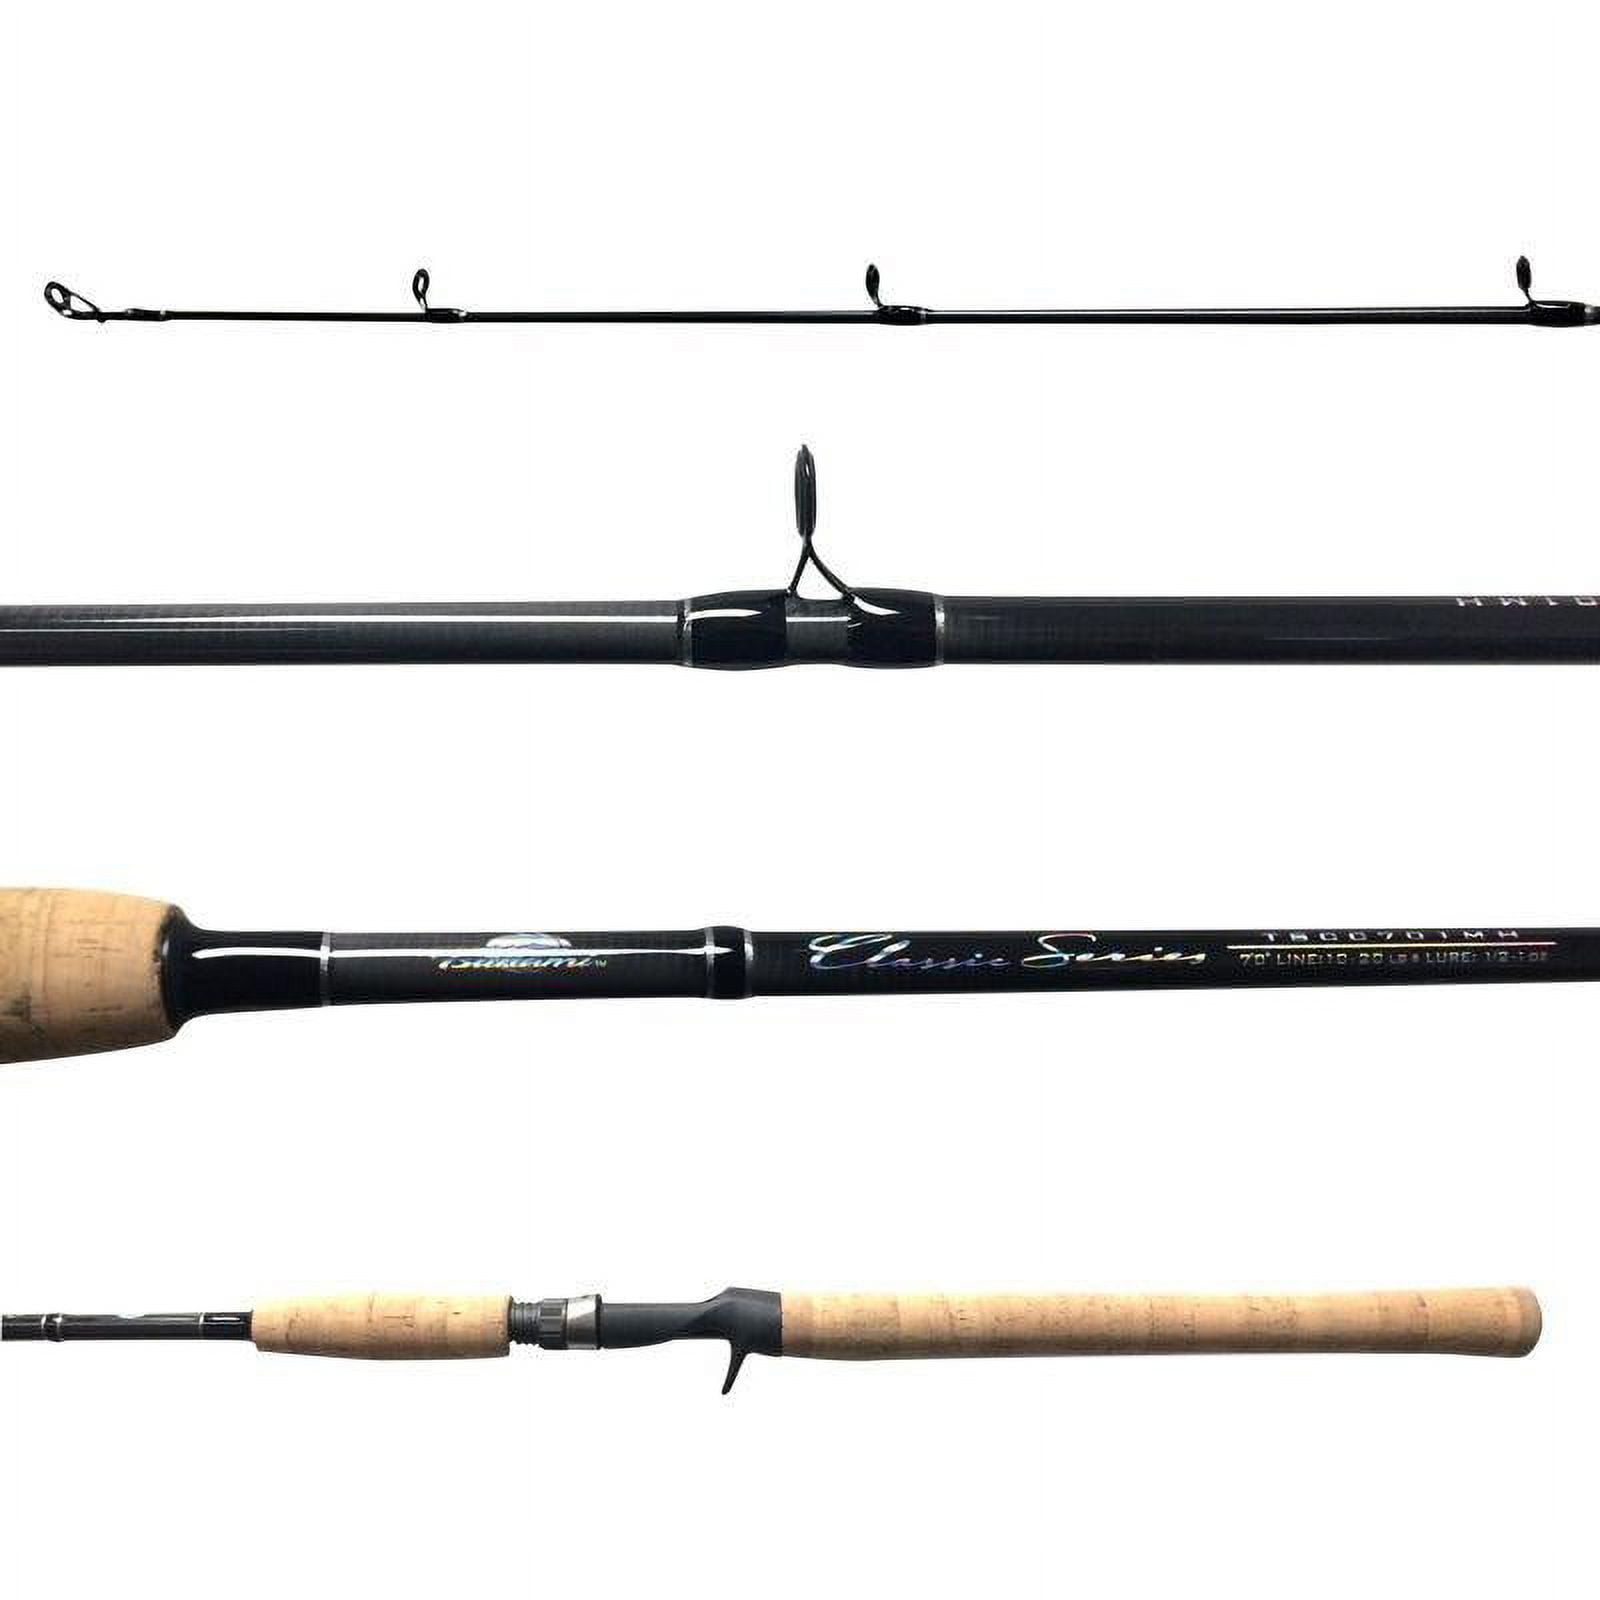 Tsunami Classic 7 Foot Travel Rod Spinning & Conventional TSCS-703M